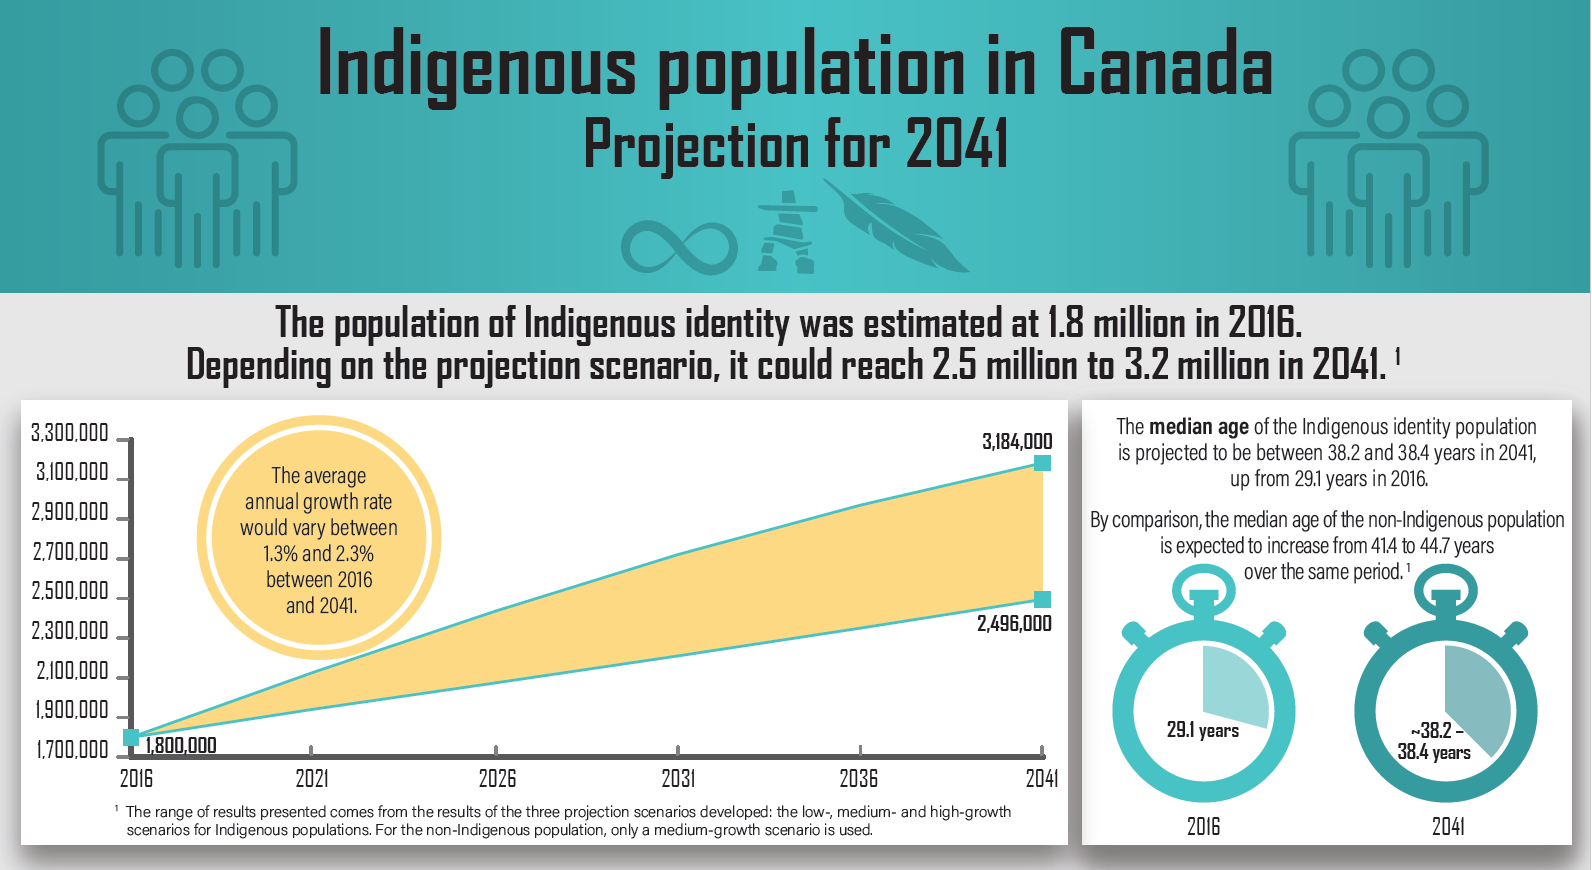 Indigenous population in Canada: Projection for 2041